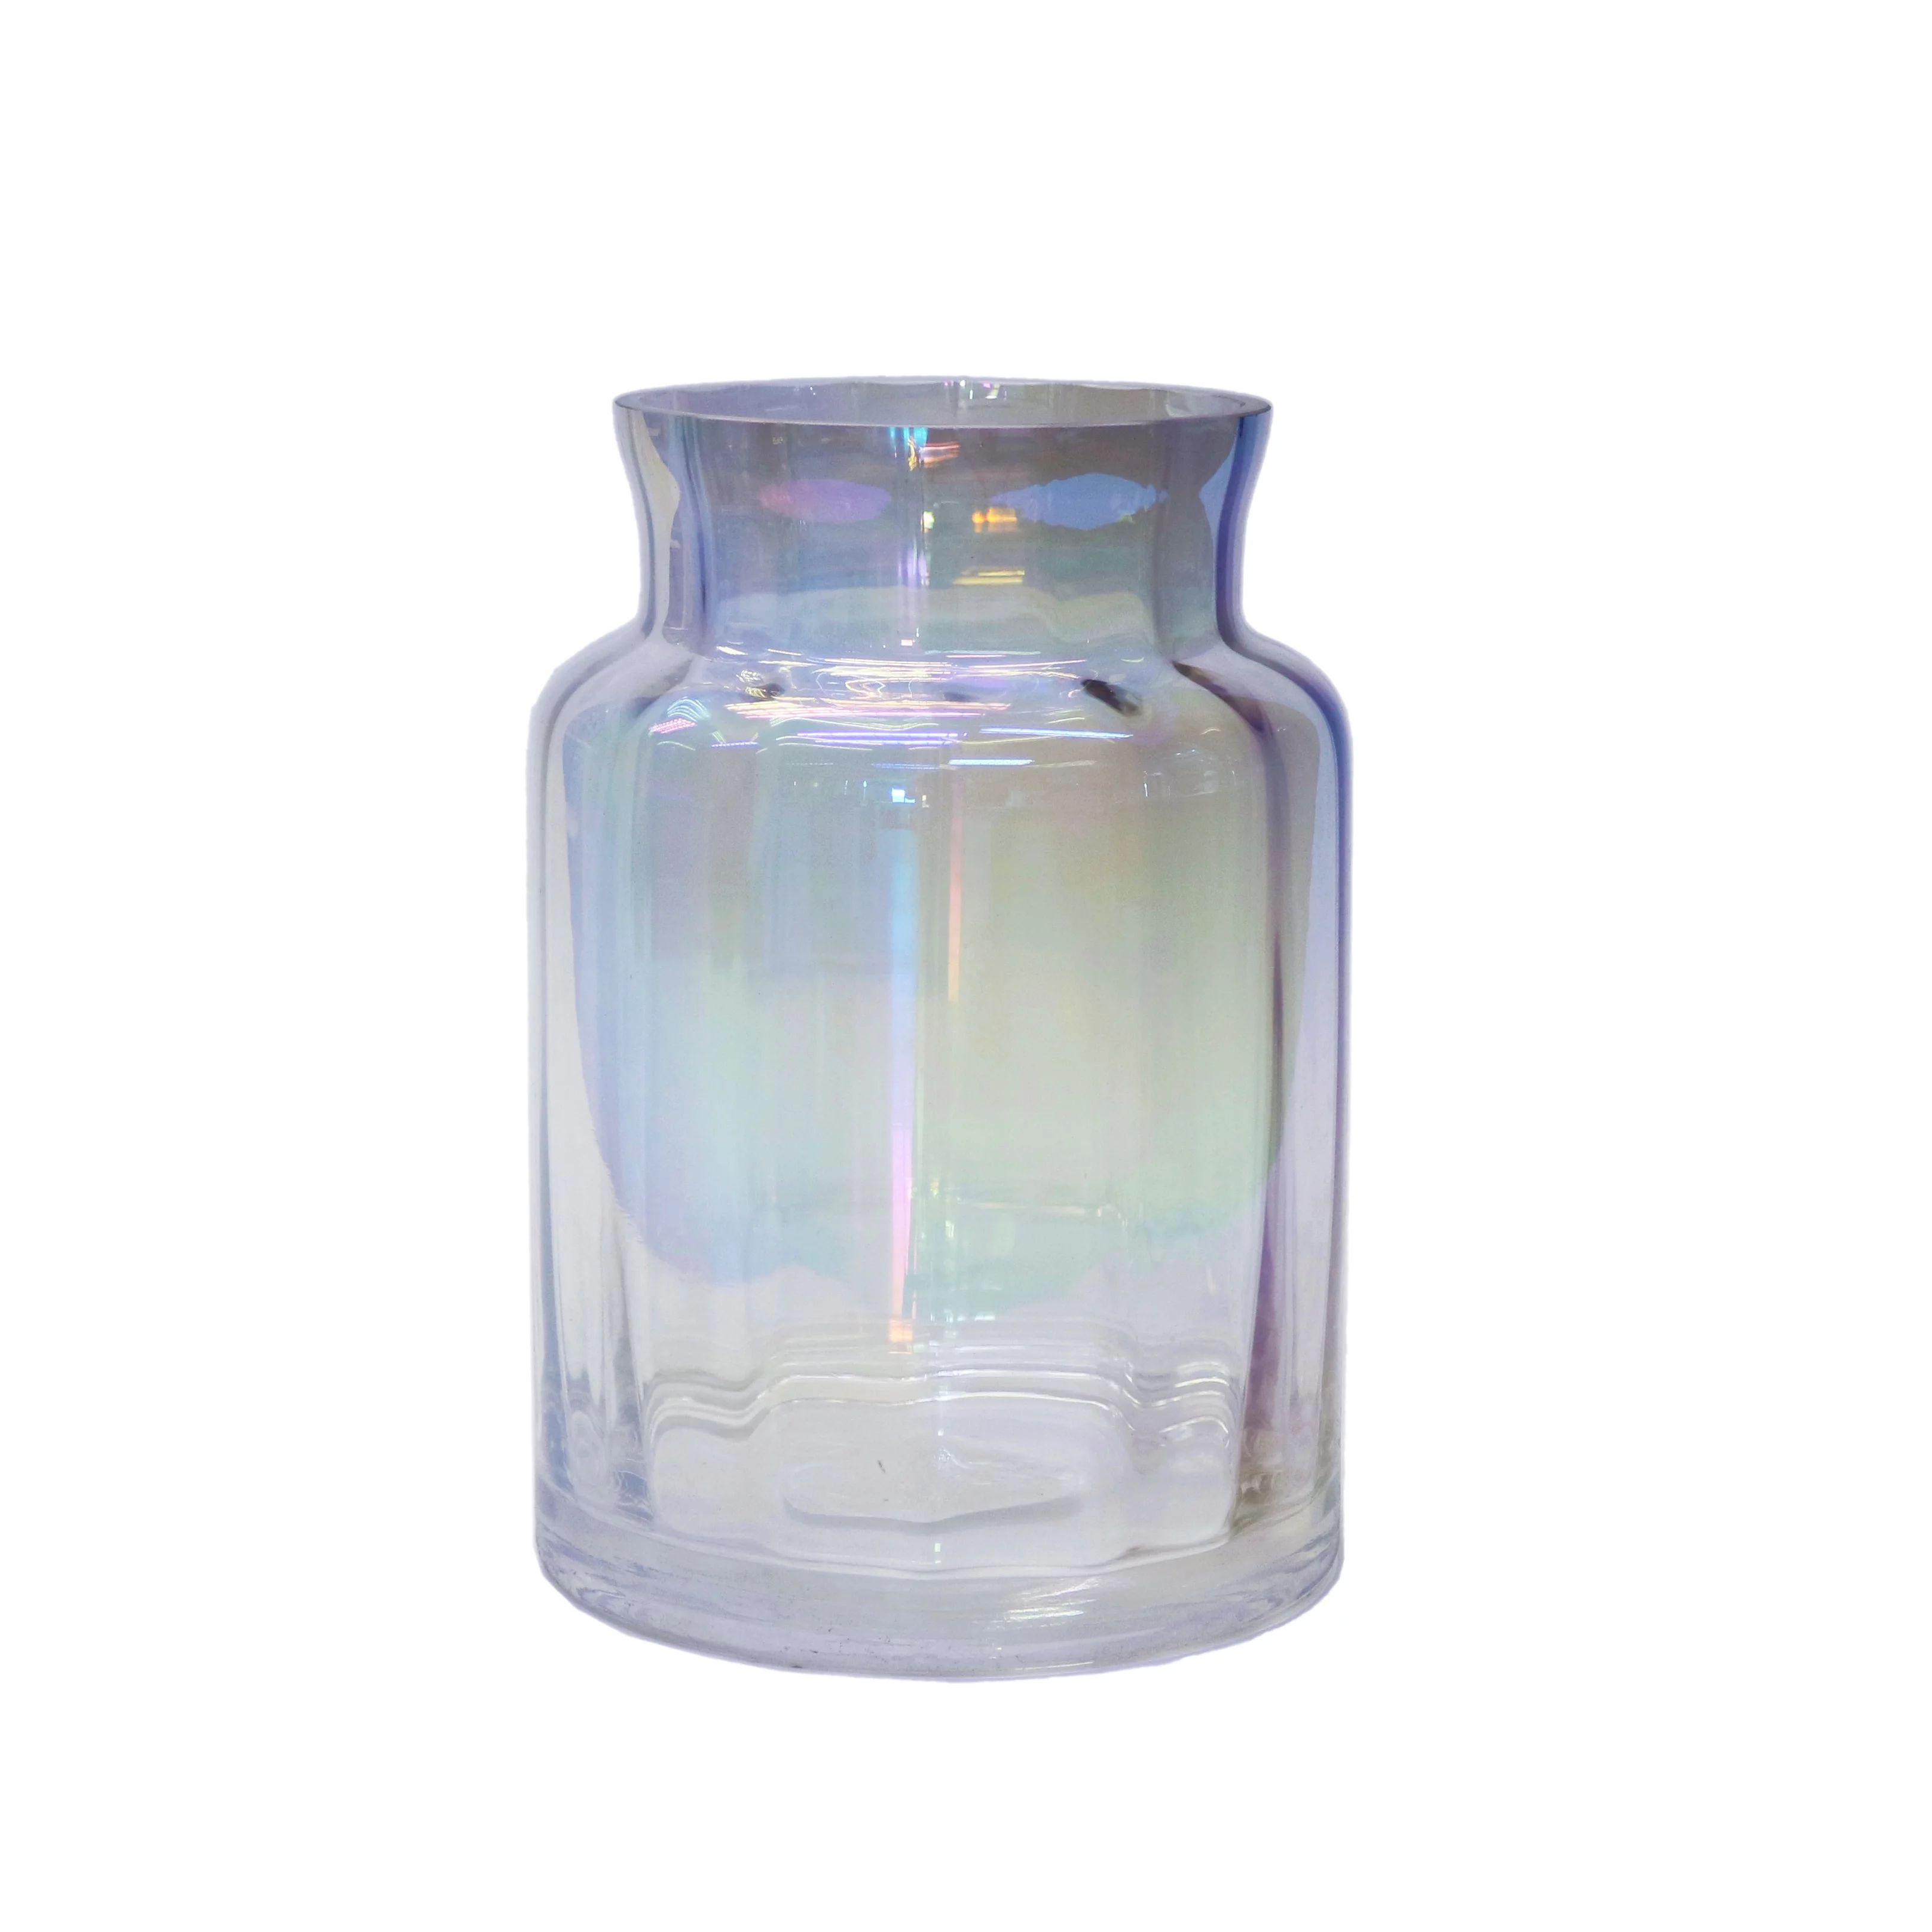 Mainstays 7.9" Glass Vase Container in Iridescent, Modern and Simple Stylish Design - Walmart.com | Walmart (US)